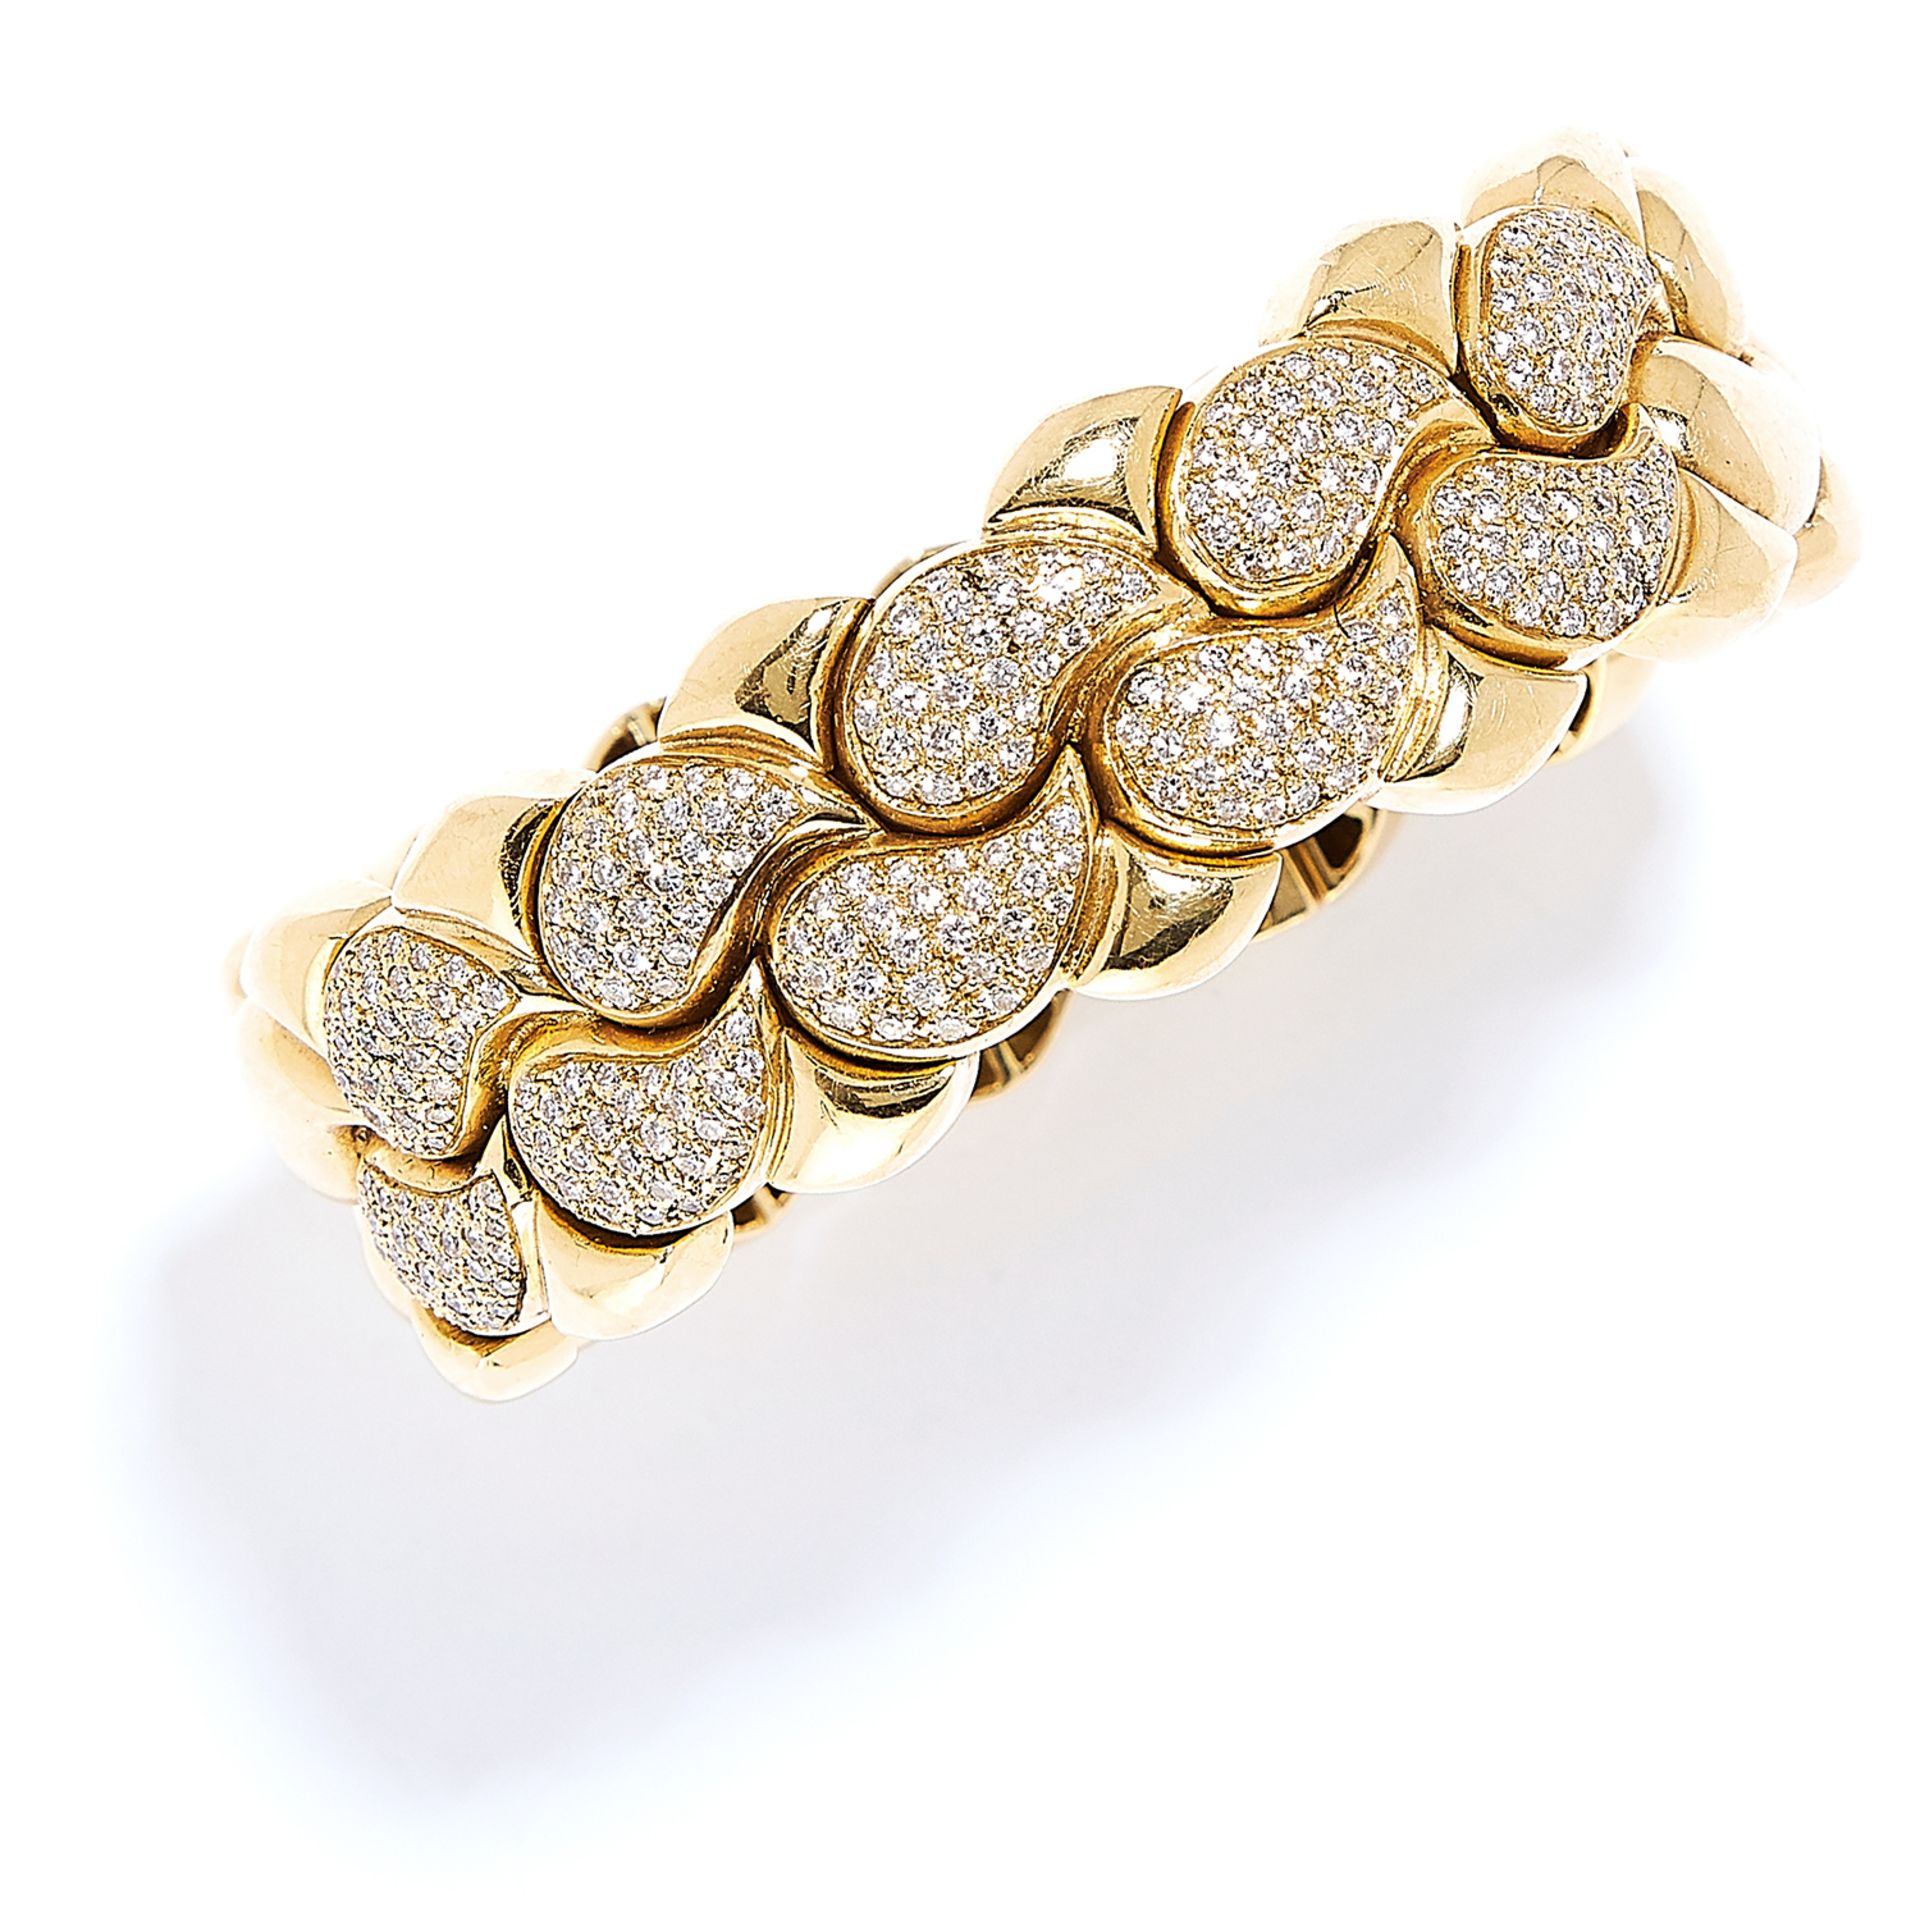 'CASMIR' DIAMOND NECKLACE AND BRACELET SUITE in 18ct yellow gold, in the style of Chopard, each - Image 3 of 4